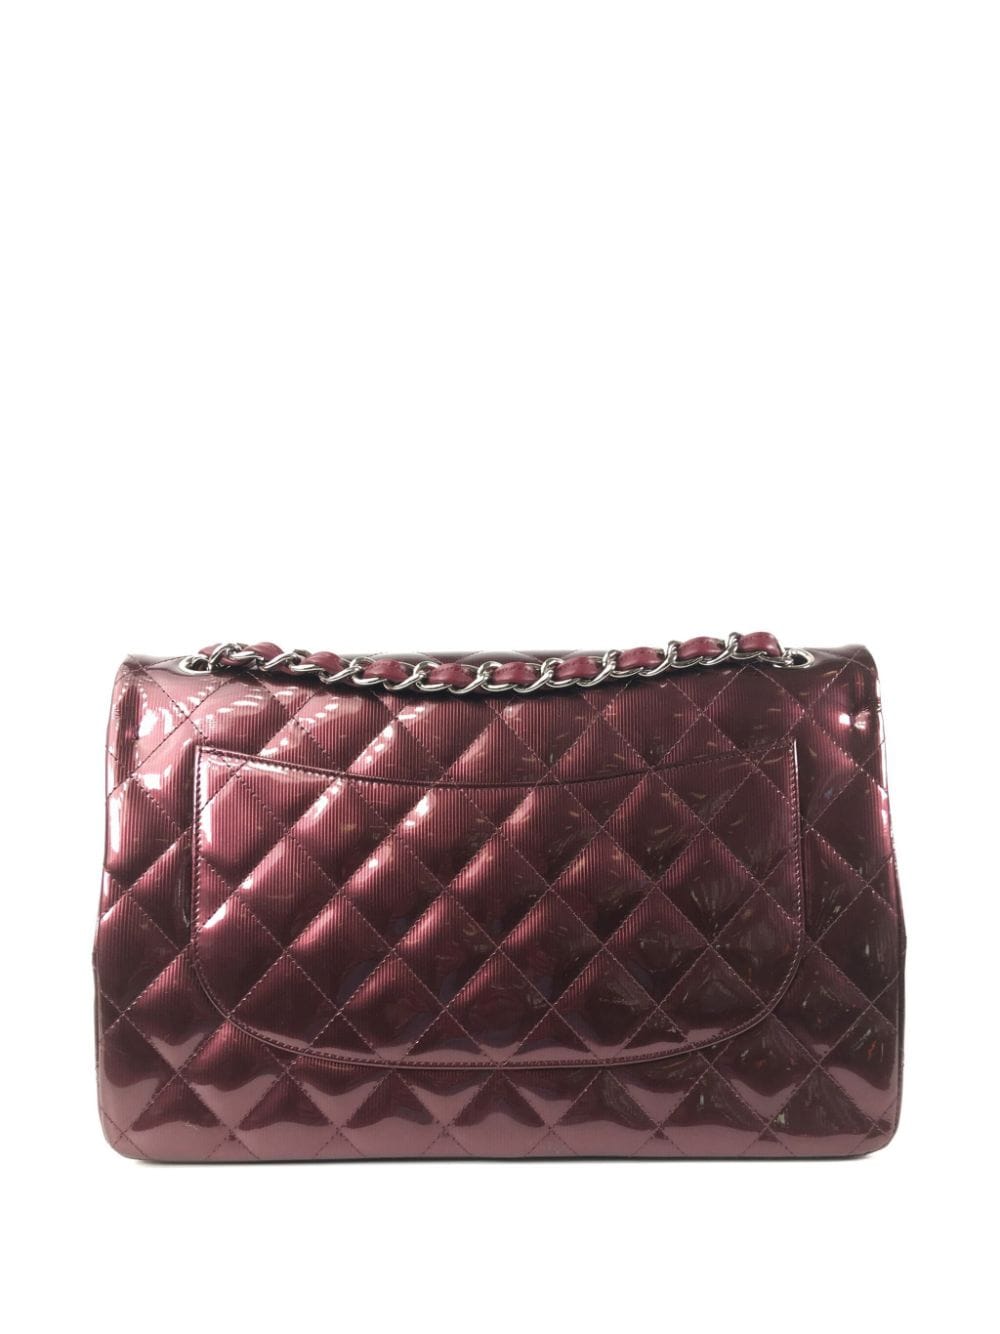 Pre-owned Chanel 2012-2013 Jumbo Double Flap Shoulder Bag In Red